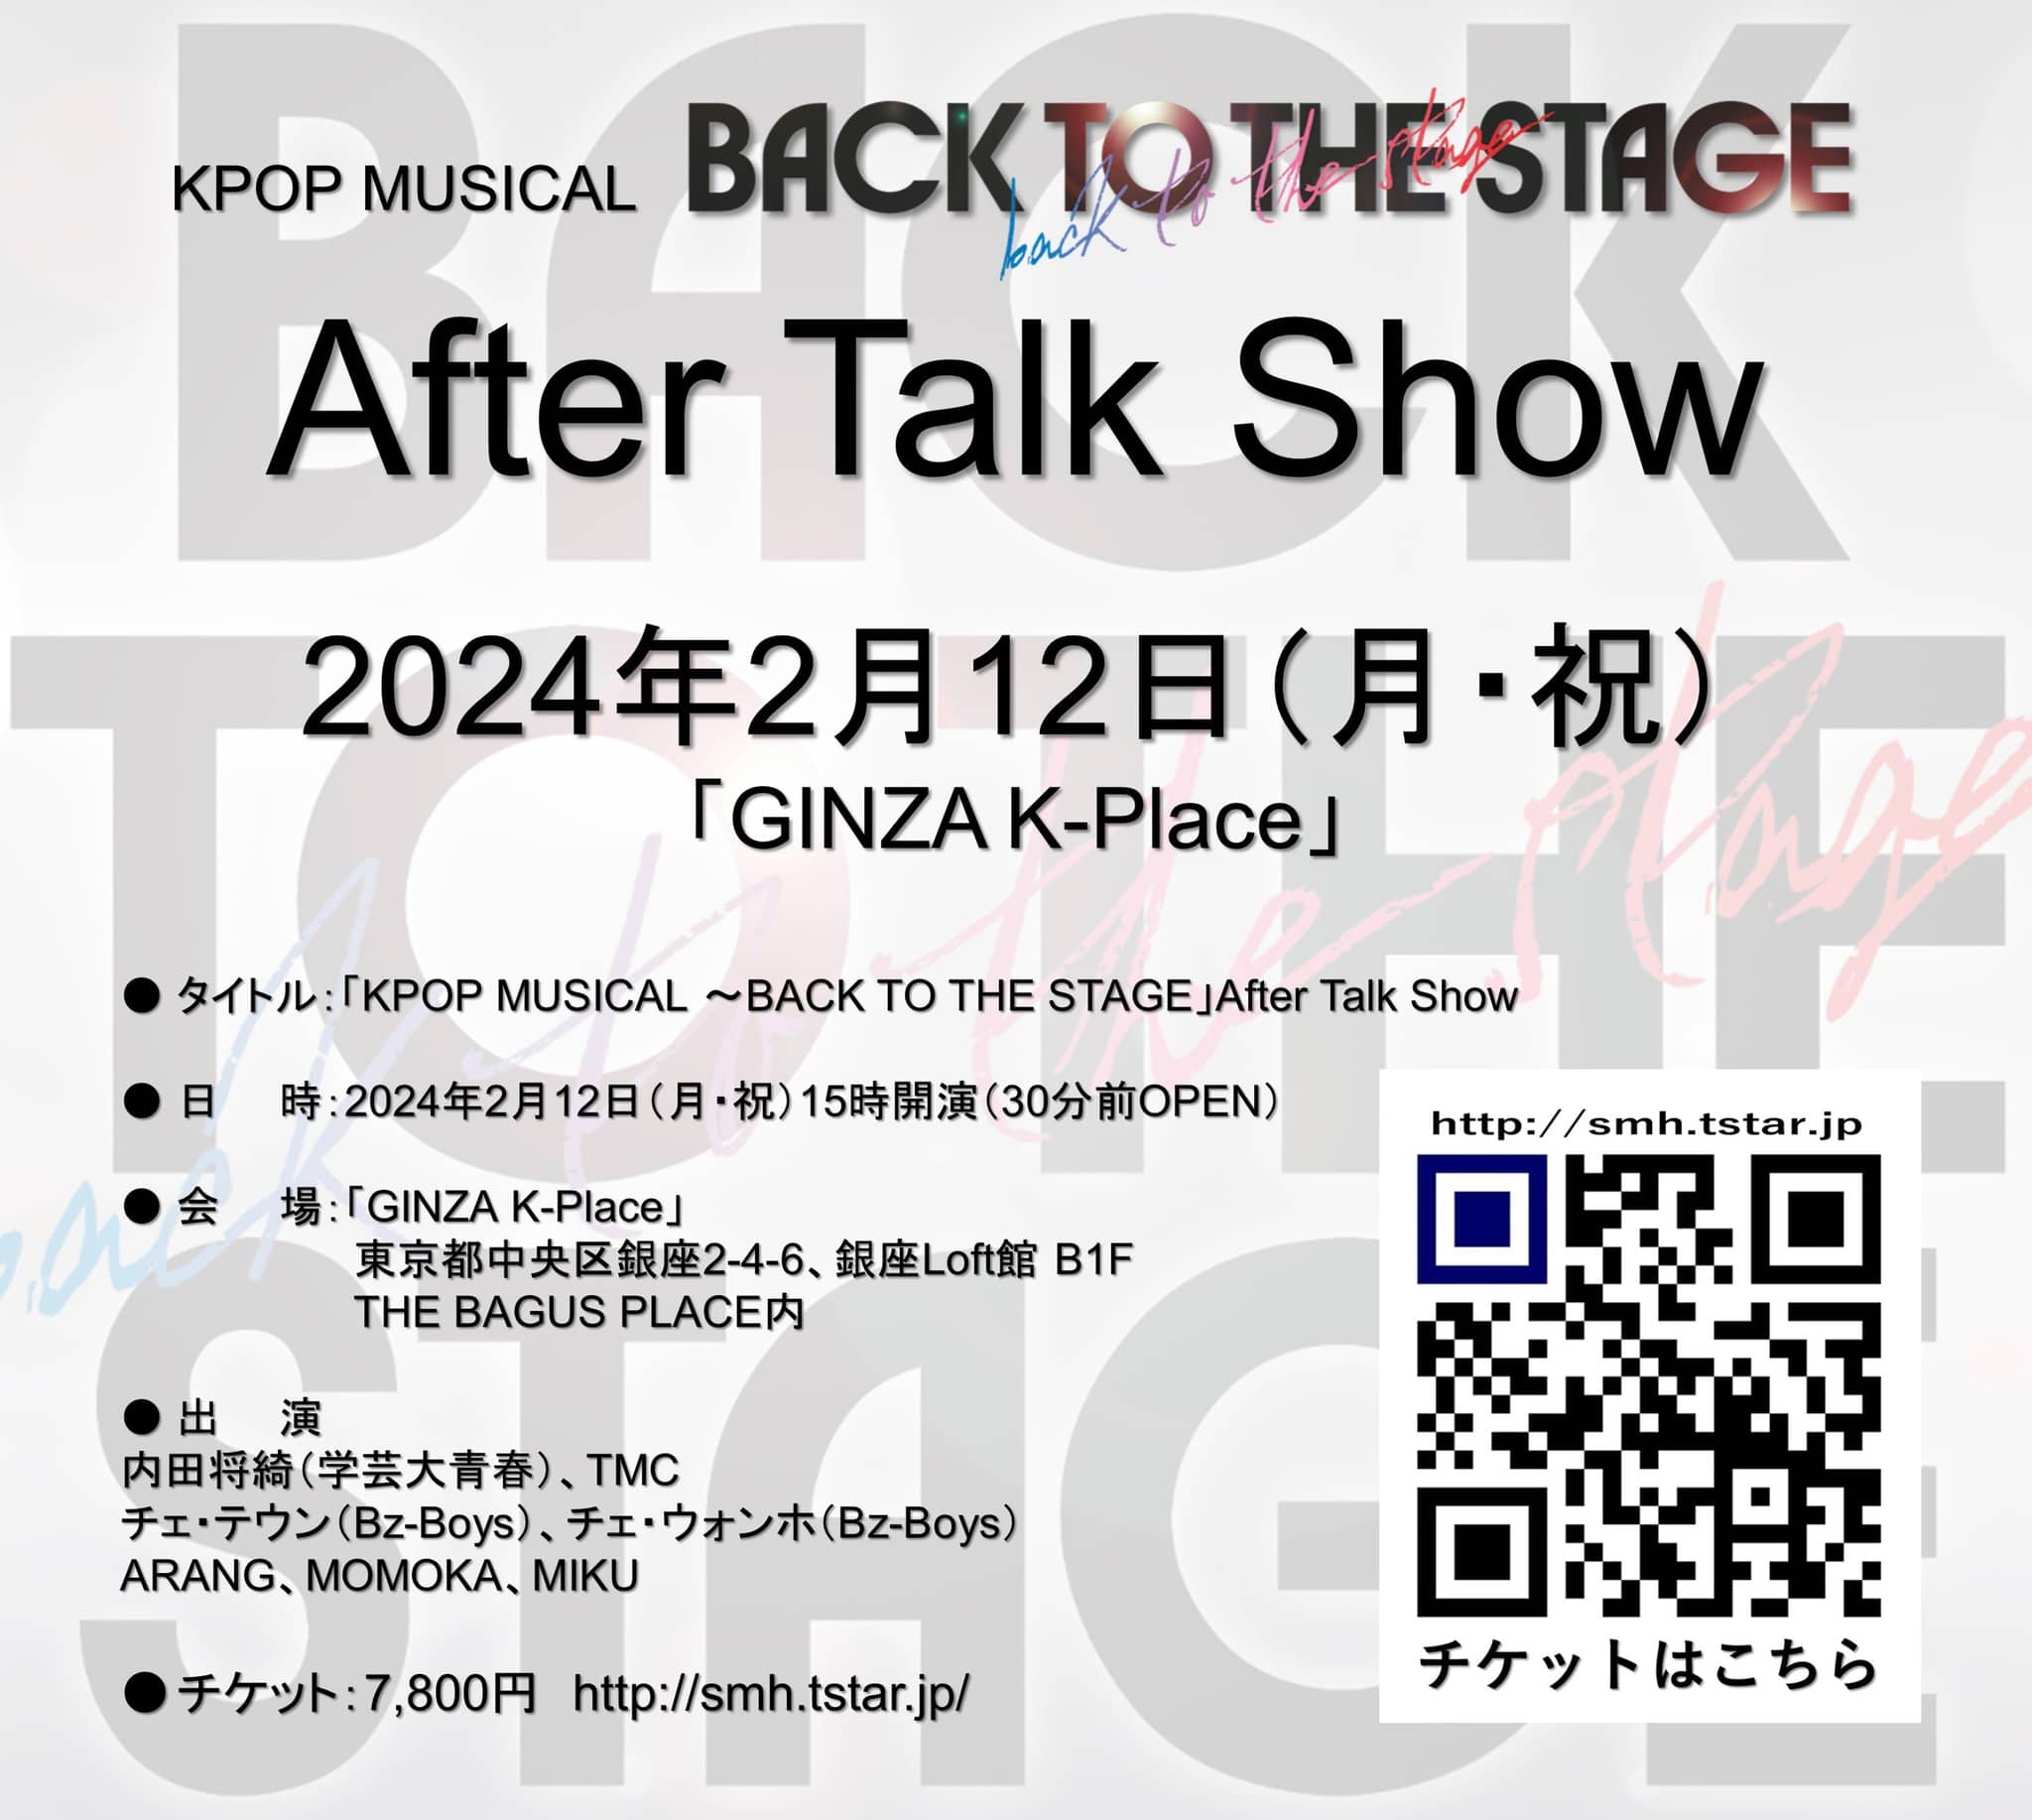 KPOP MUSICAL「BACK TO THE STAGE」After Talk Show